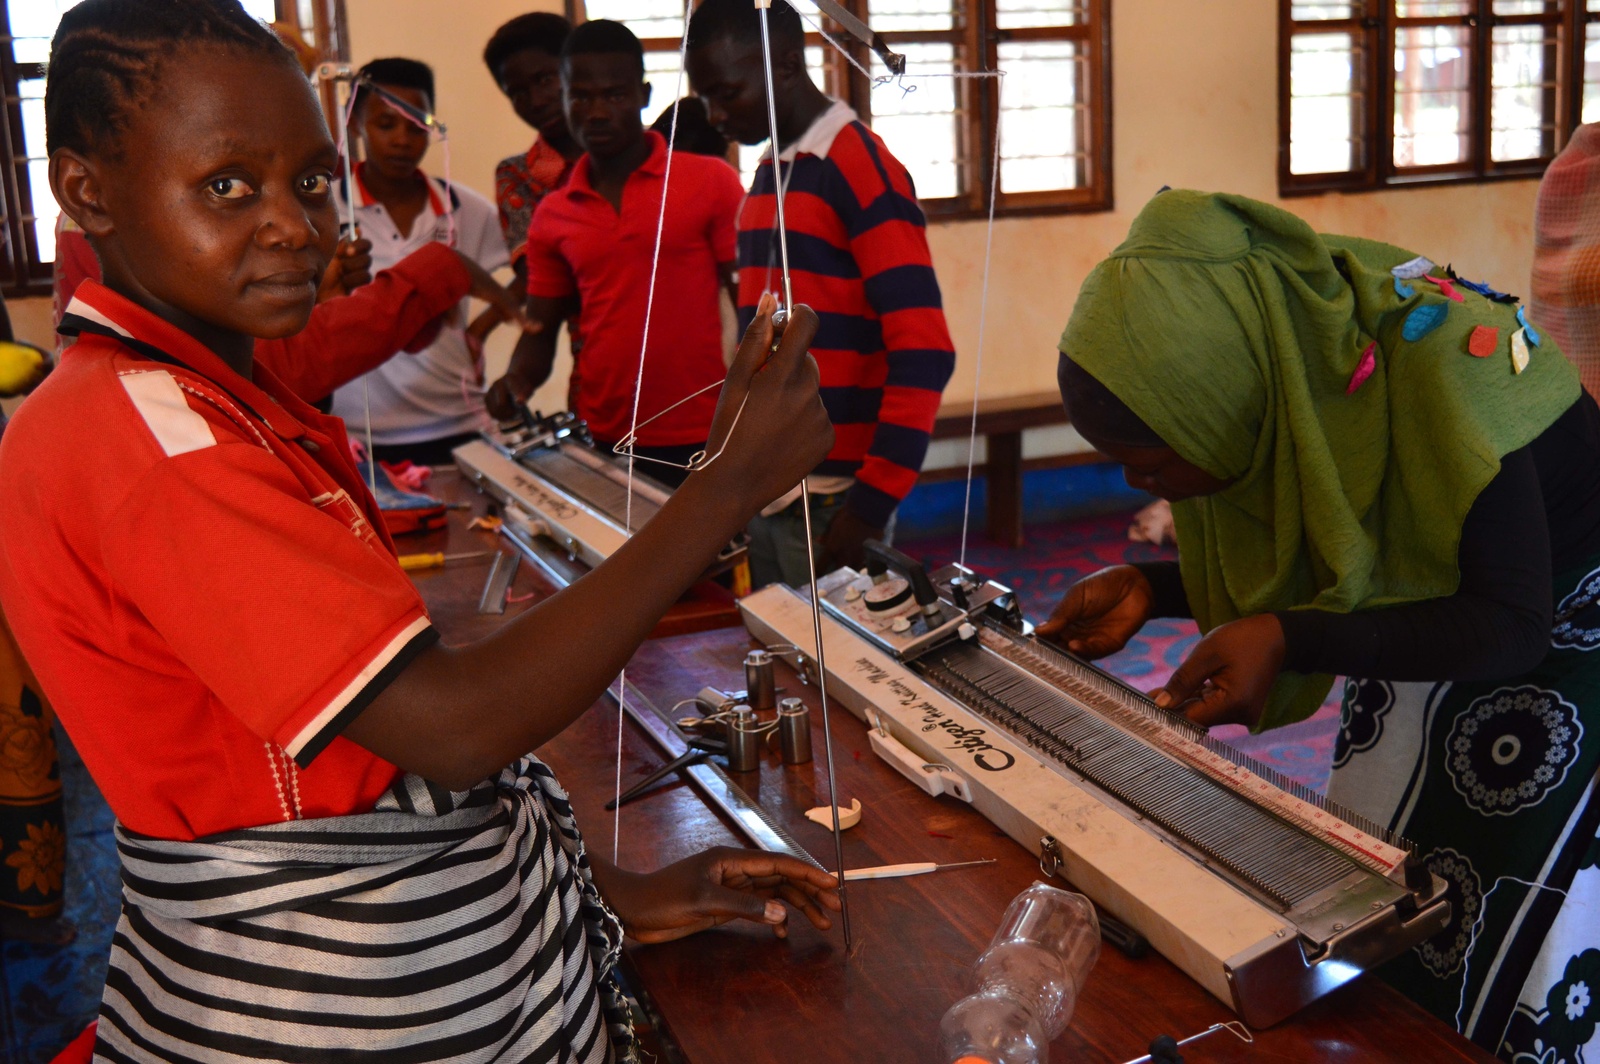 Tanzania. A tailoring class gives refugees opportunities